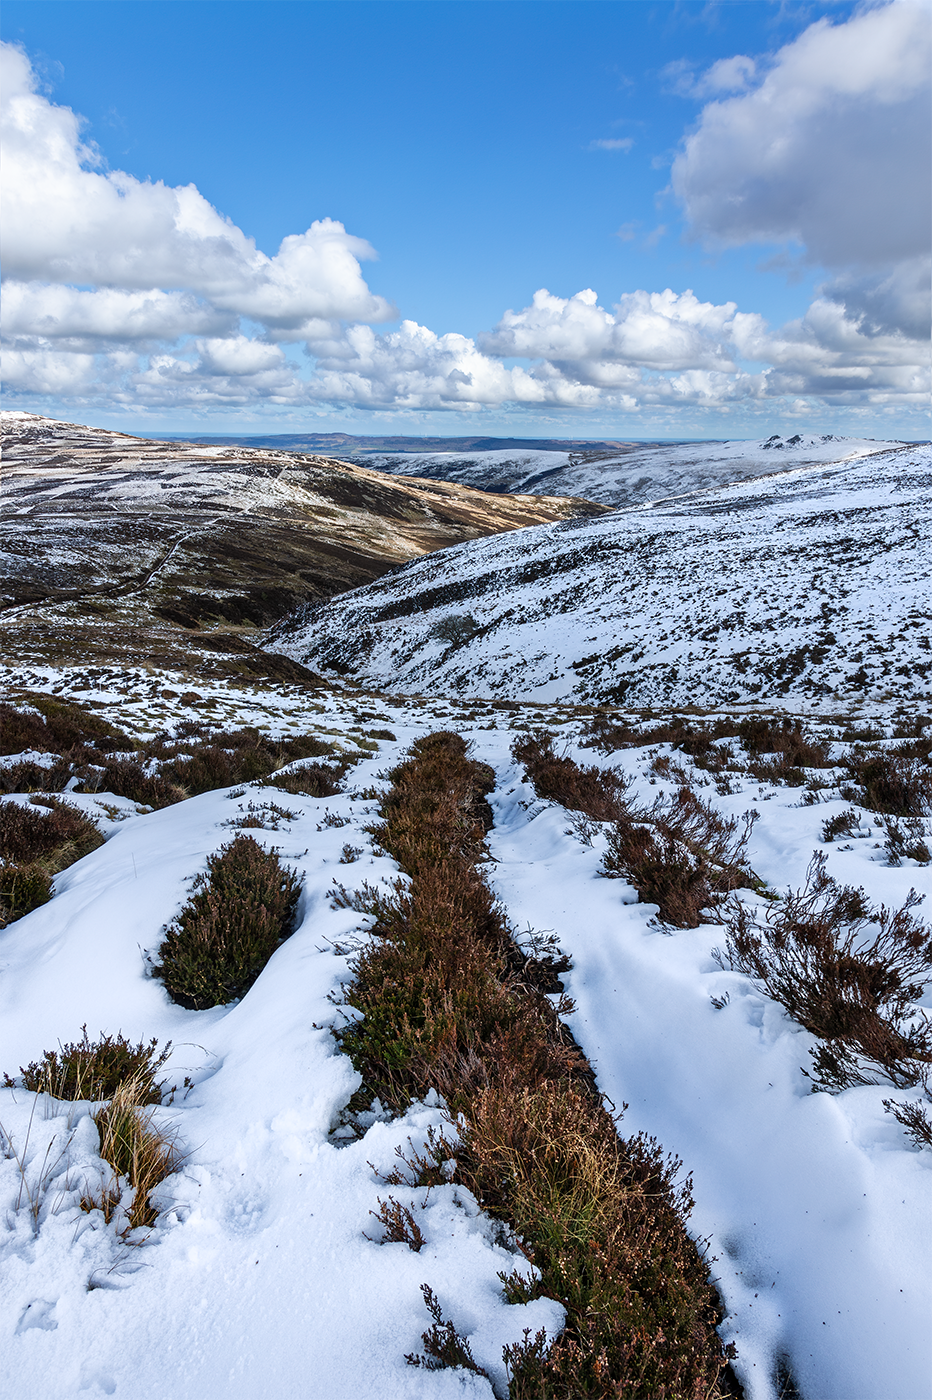 Late Spring snowfall begins to melt on the slopes of the Cheviot Hills